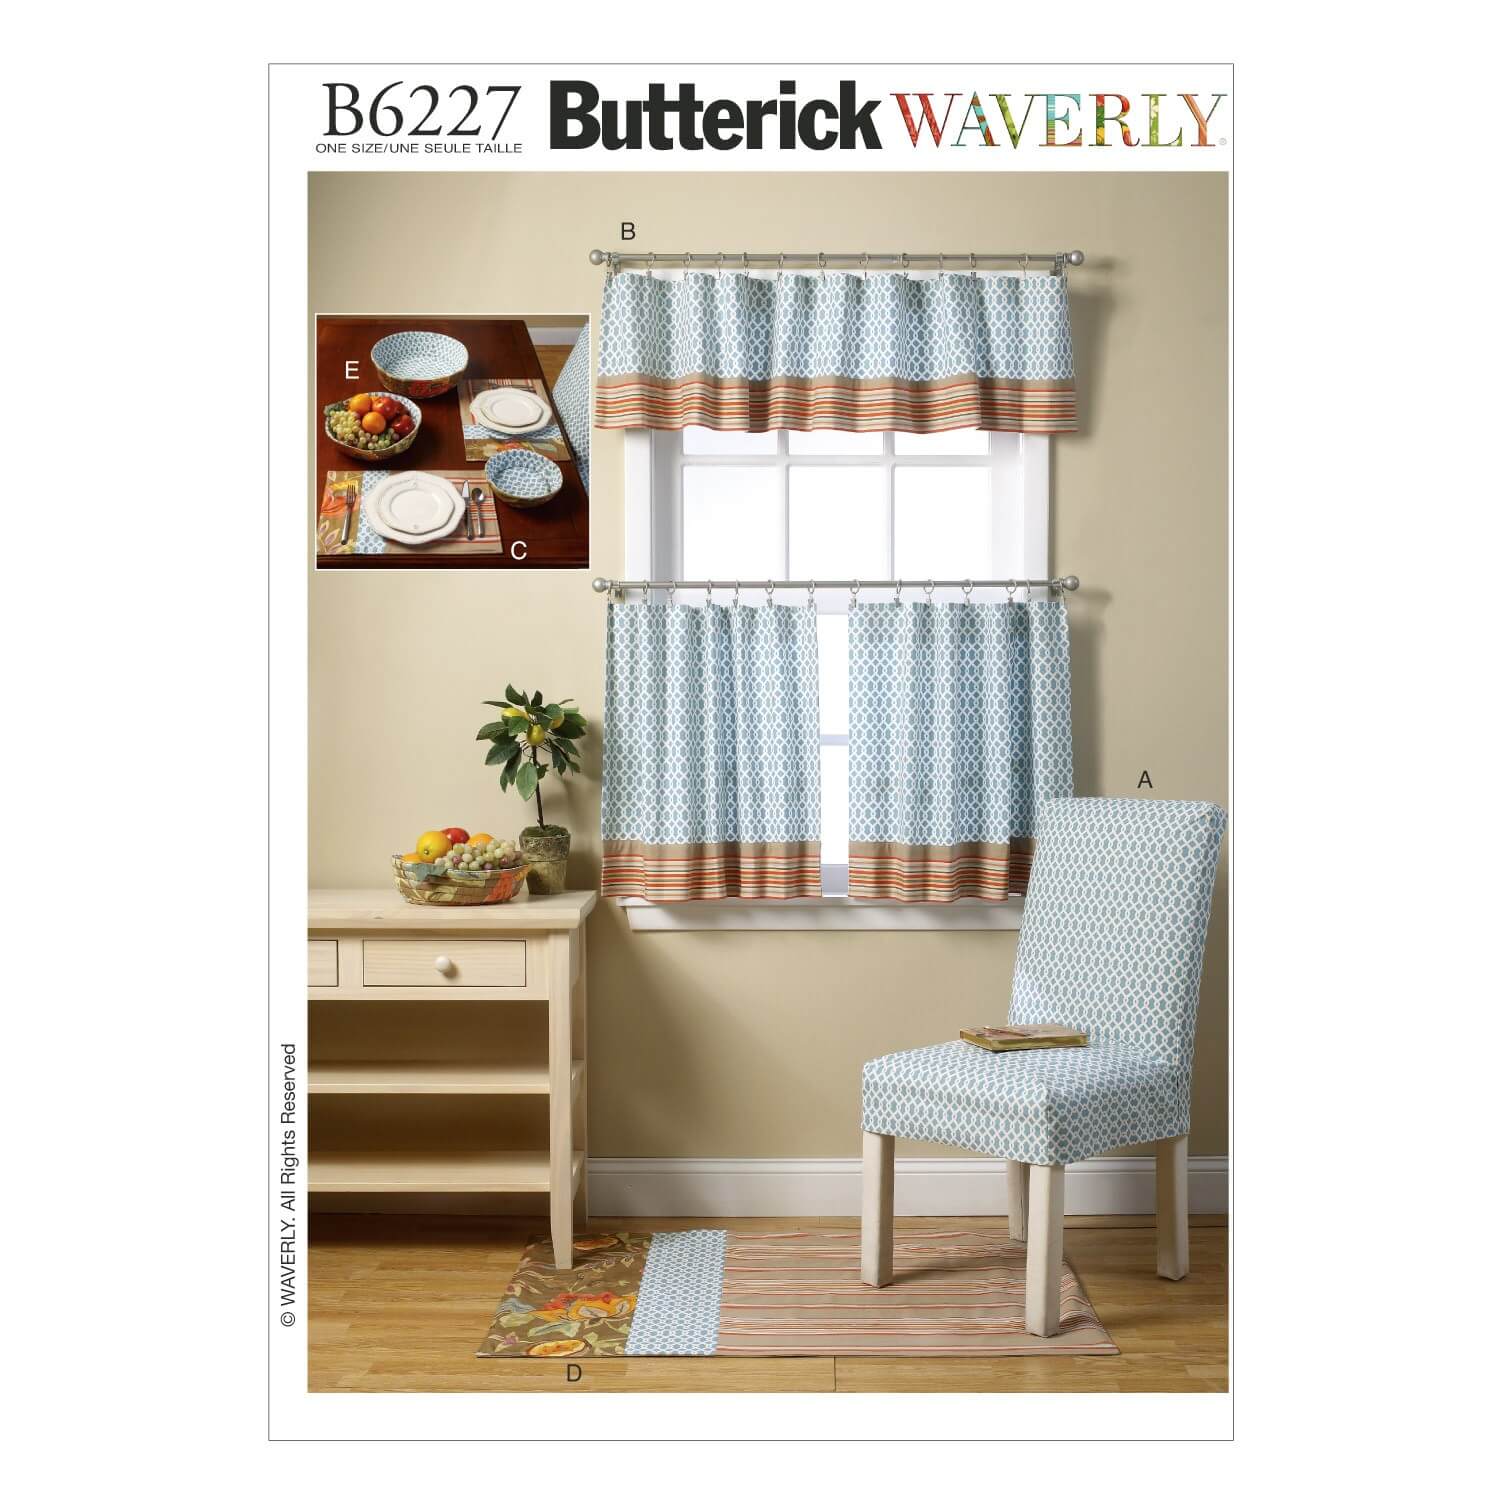 Butterick Sewing Pattern 6227 Kitchen Items Chair Rug Curtain Placemats